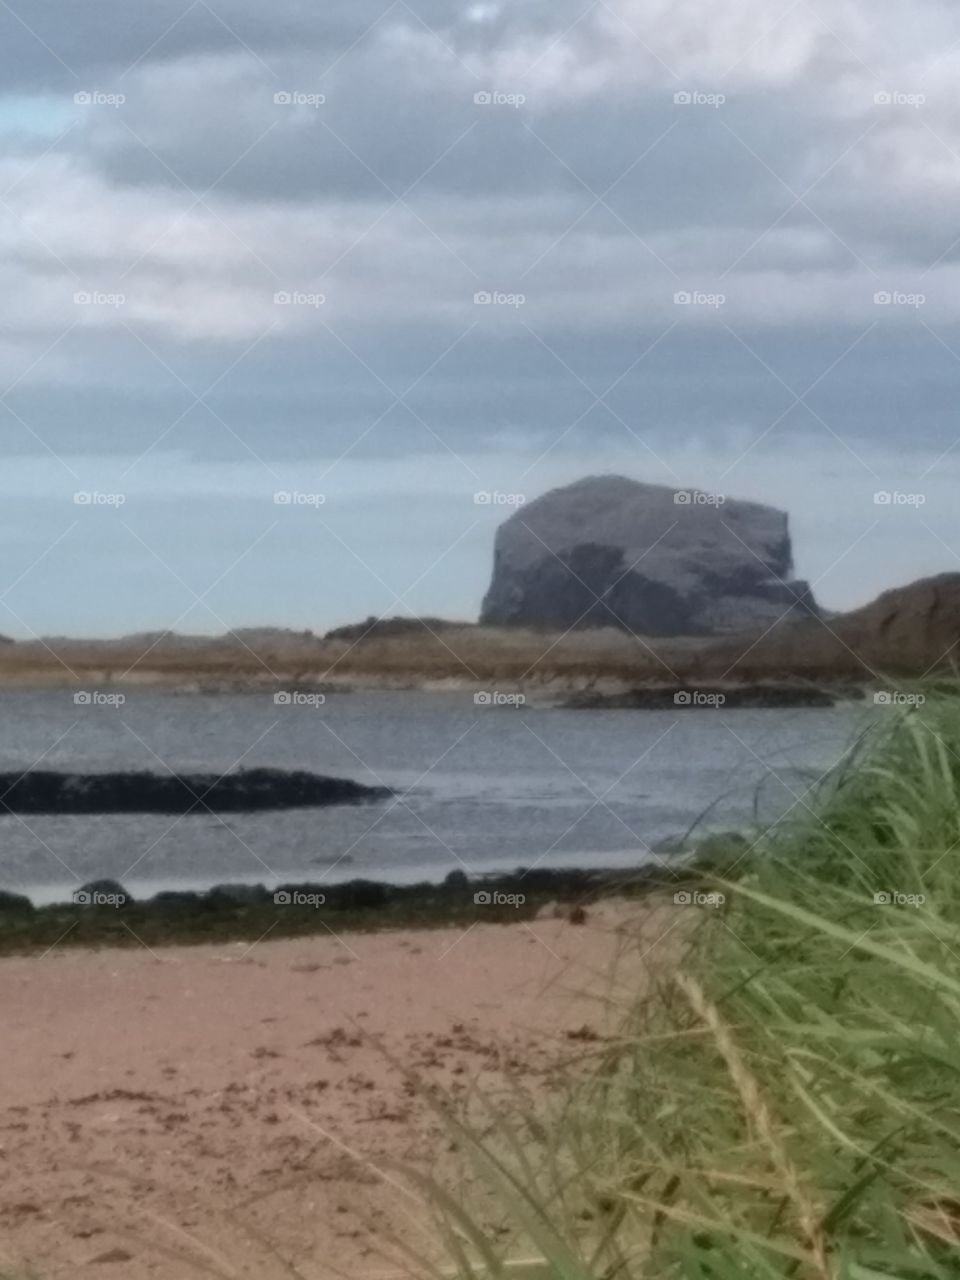 Another picture of the bass rock in August 2019